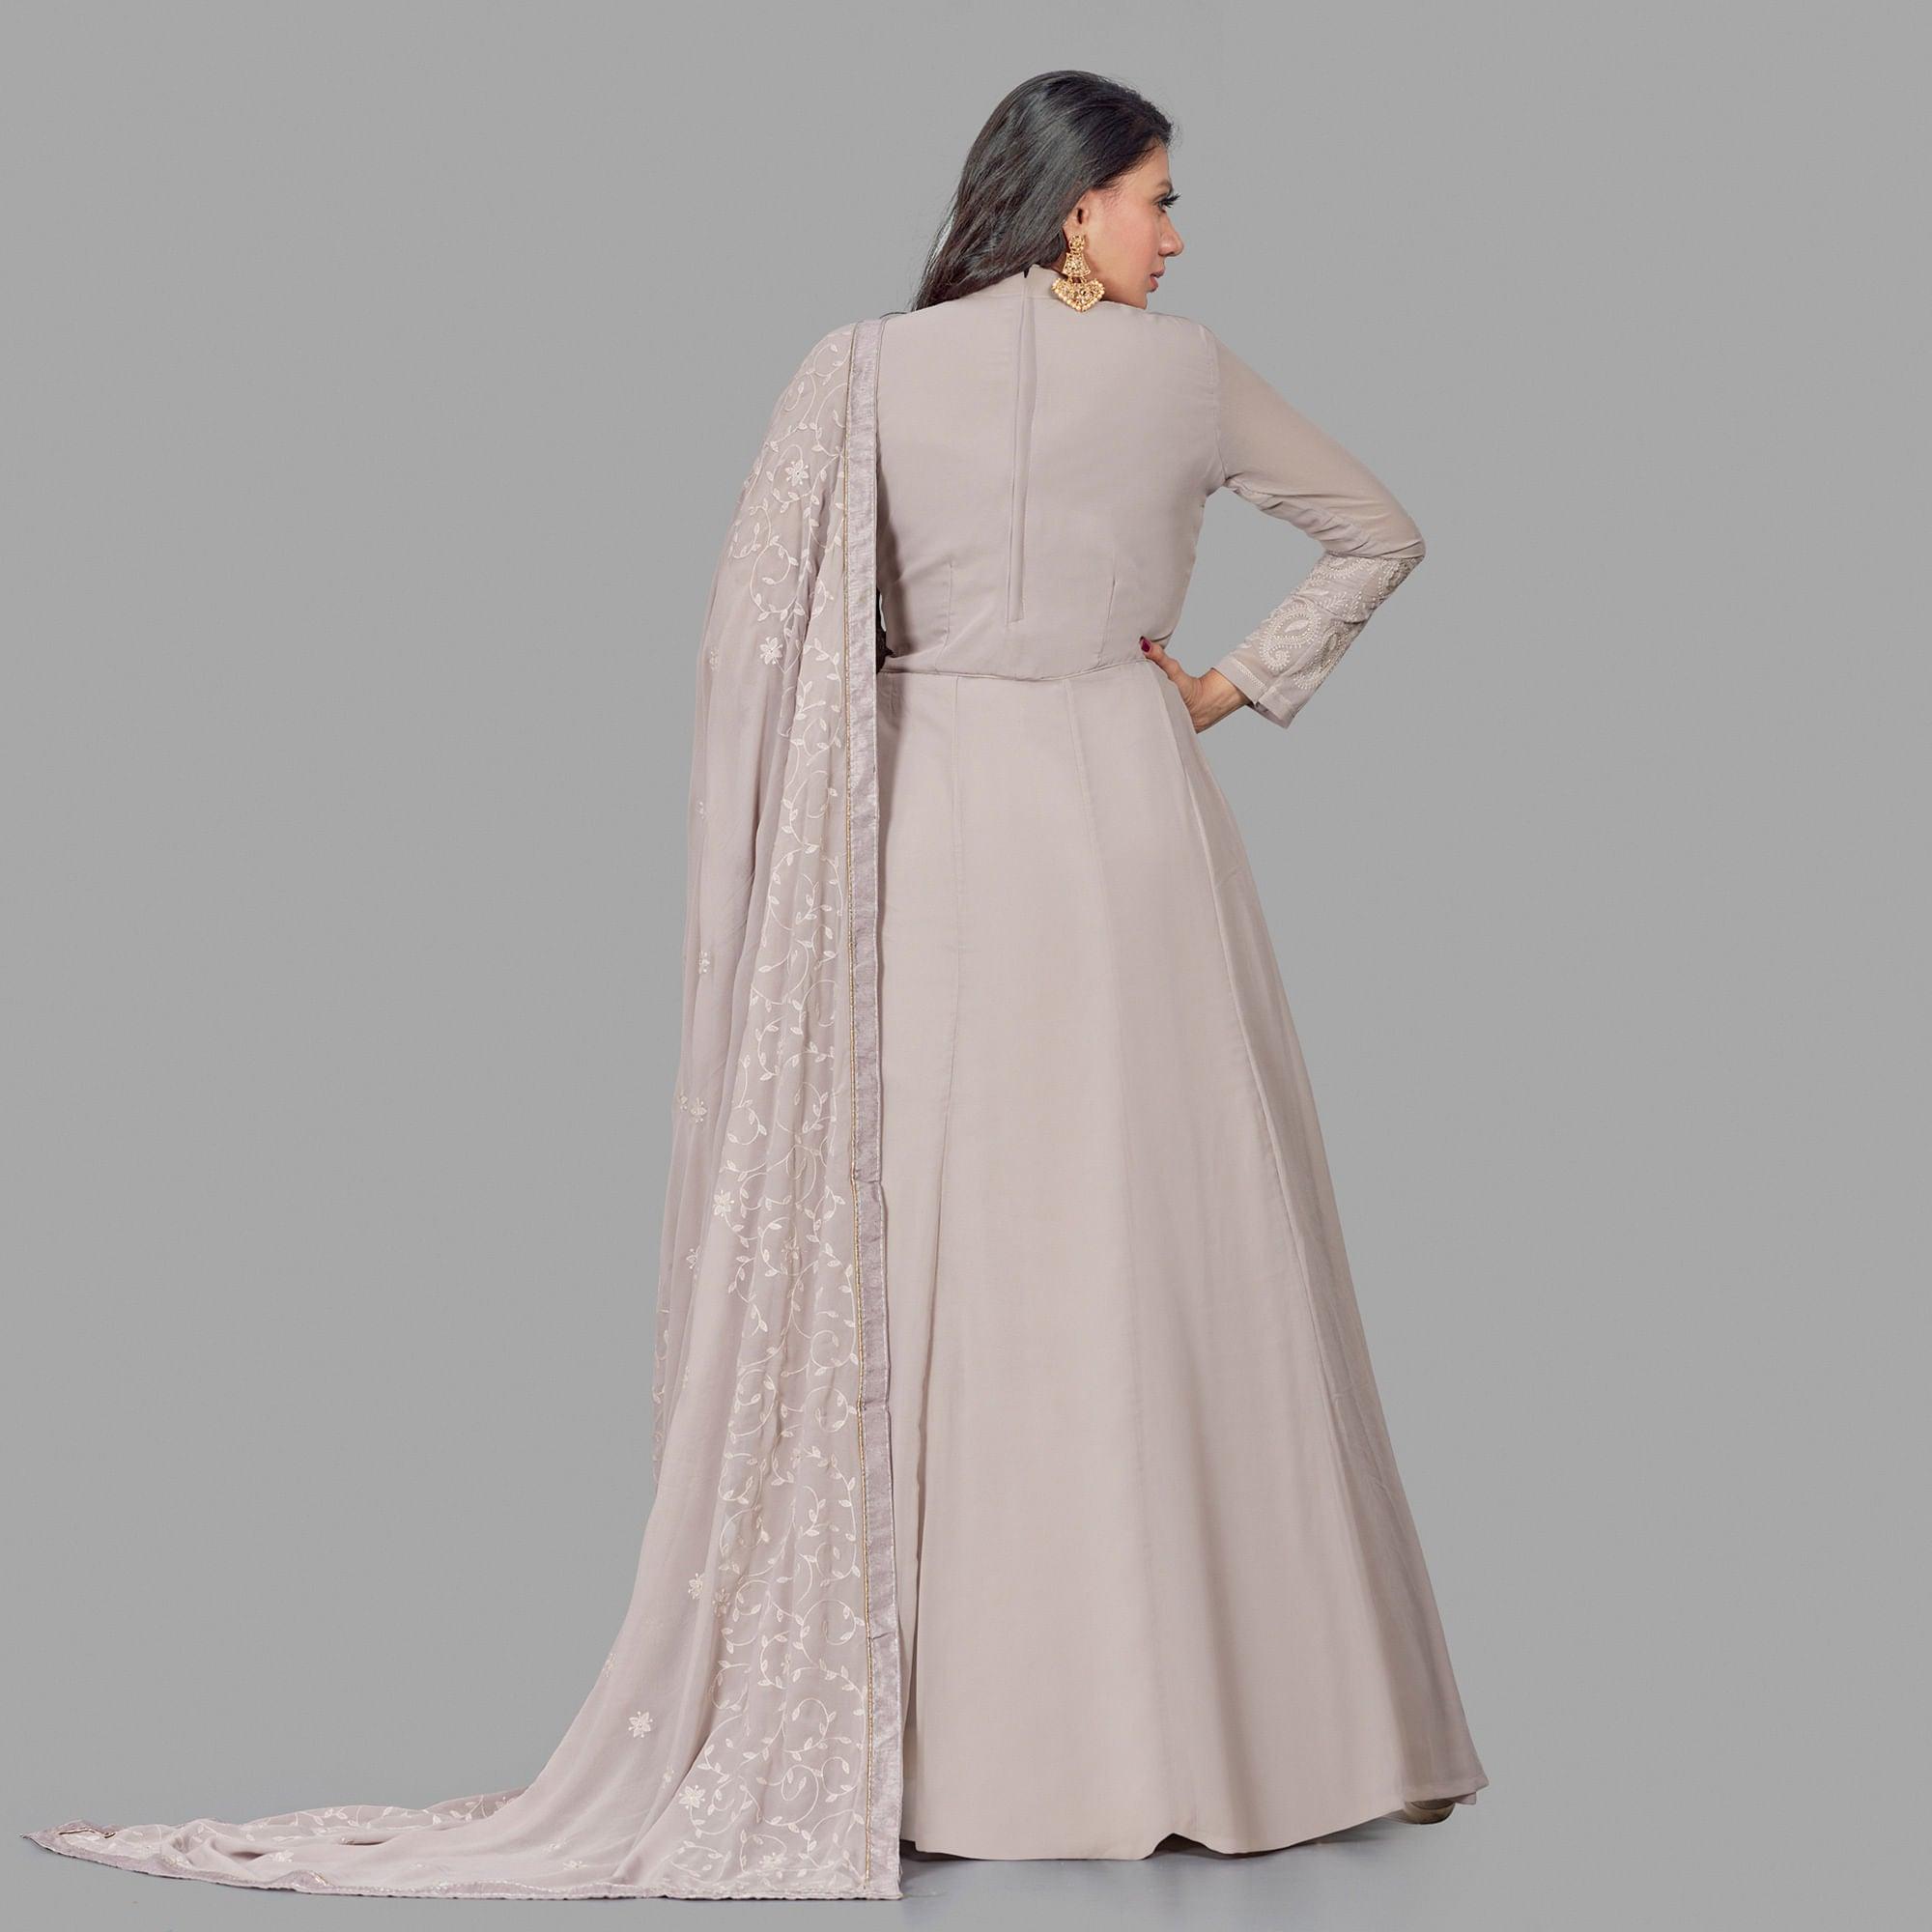 Jazzy Grey Colored Party Wear Embroidered Heavy Faux Georgette Anarkali Suit - Peachmode